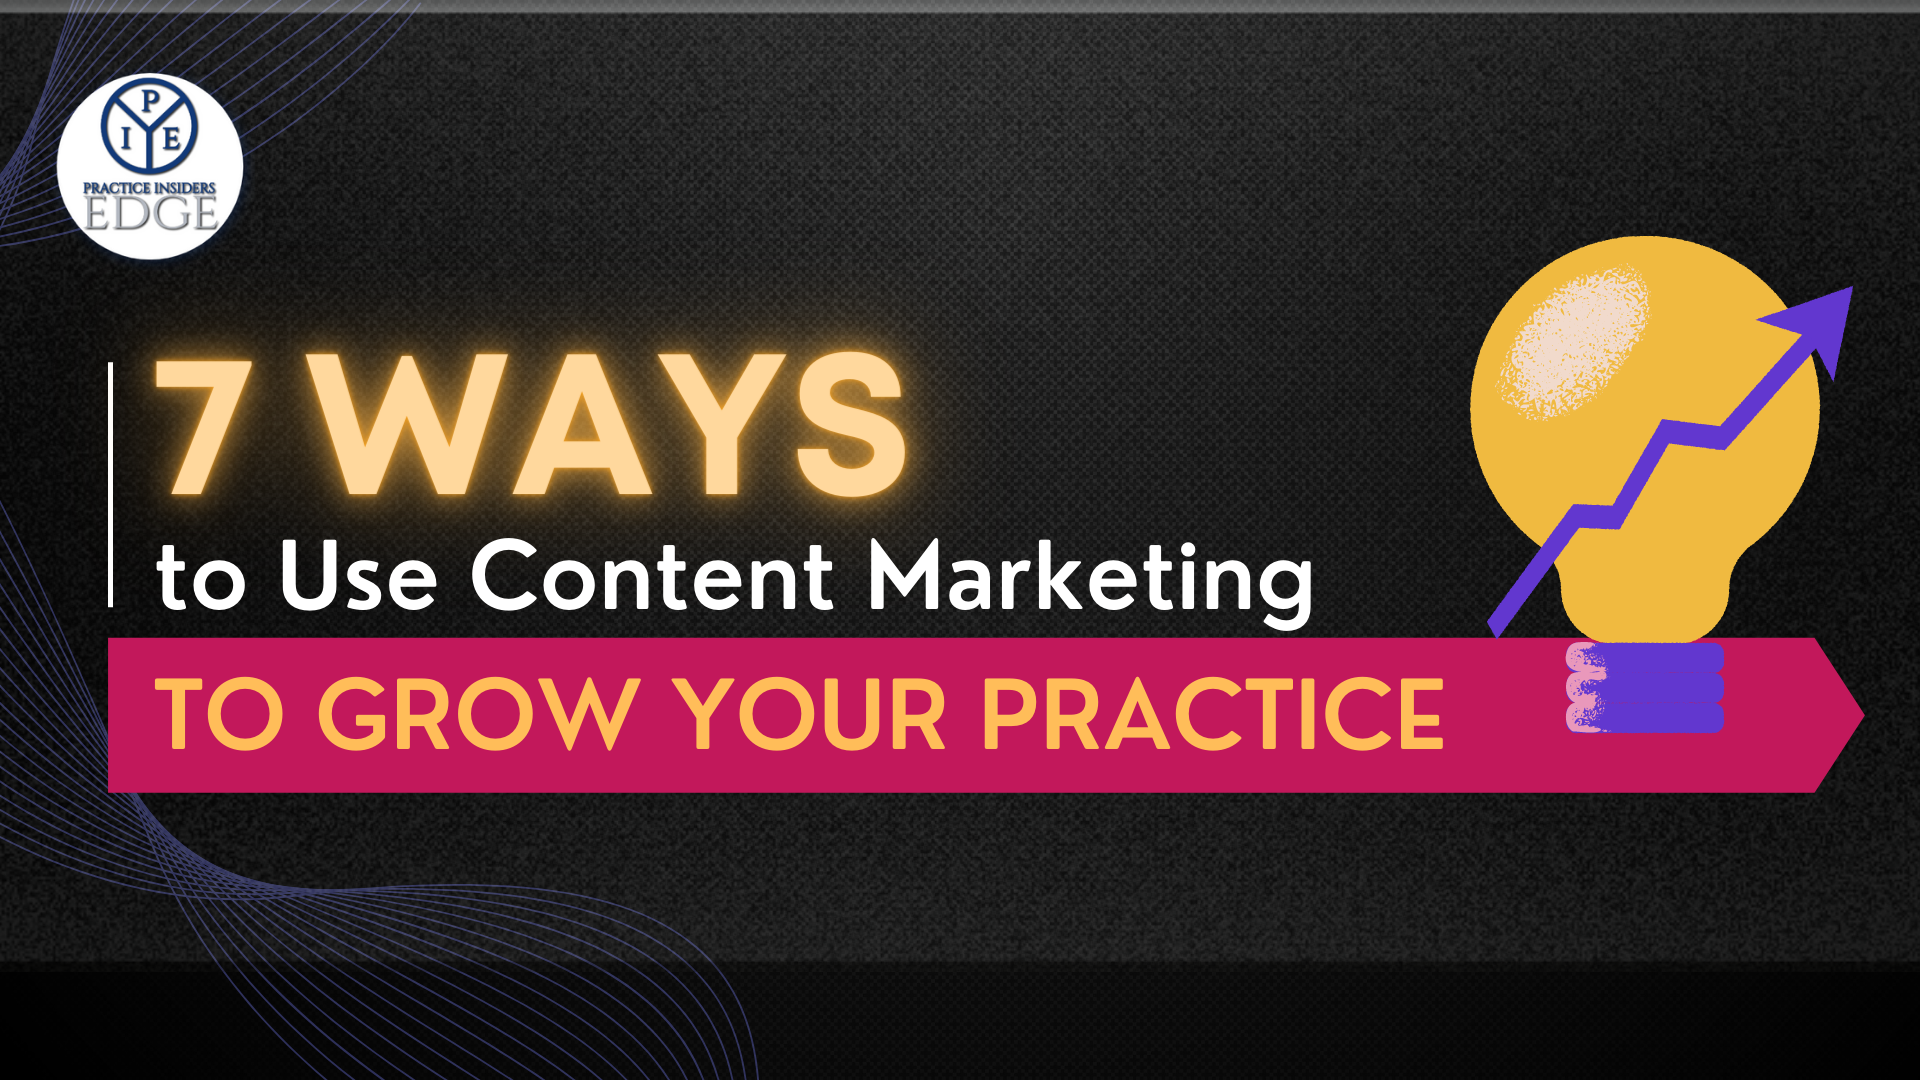 7 Ways to Use Content Marketing to Grow Your Practice